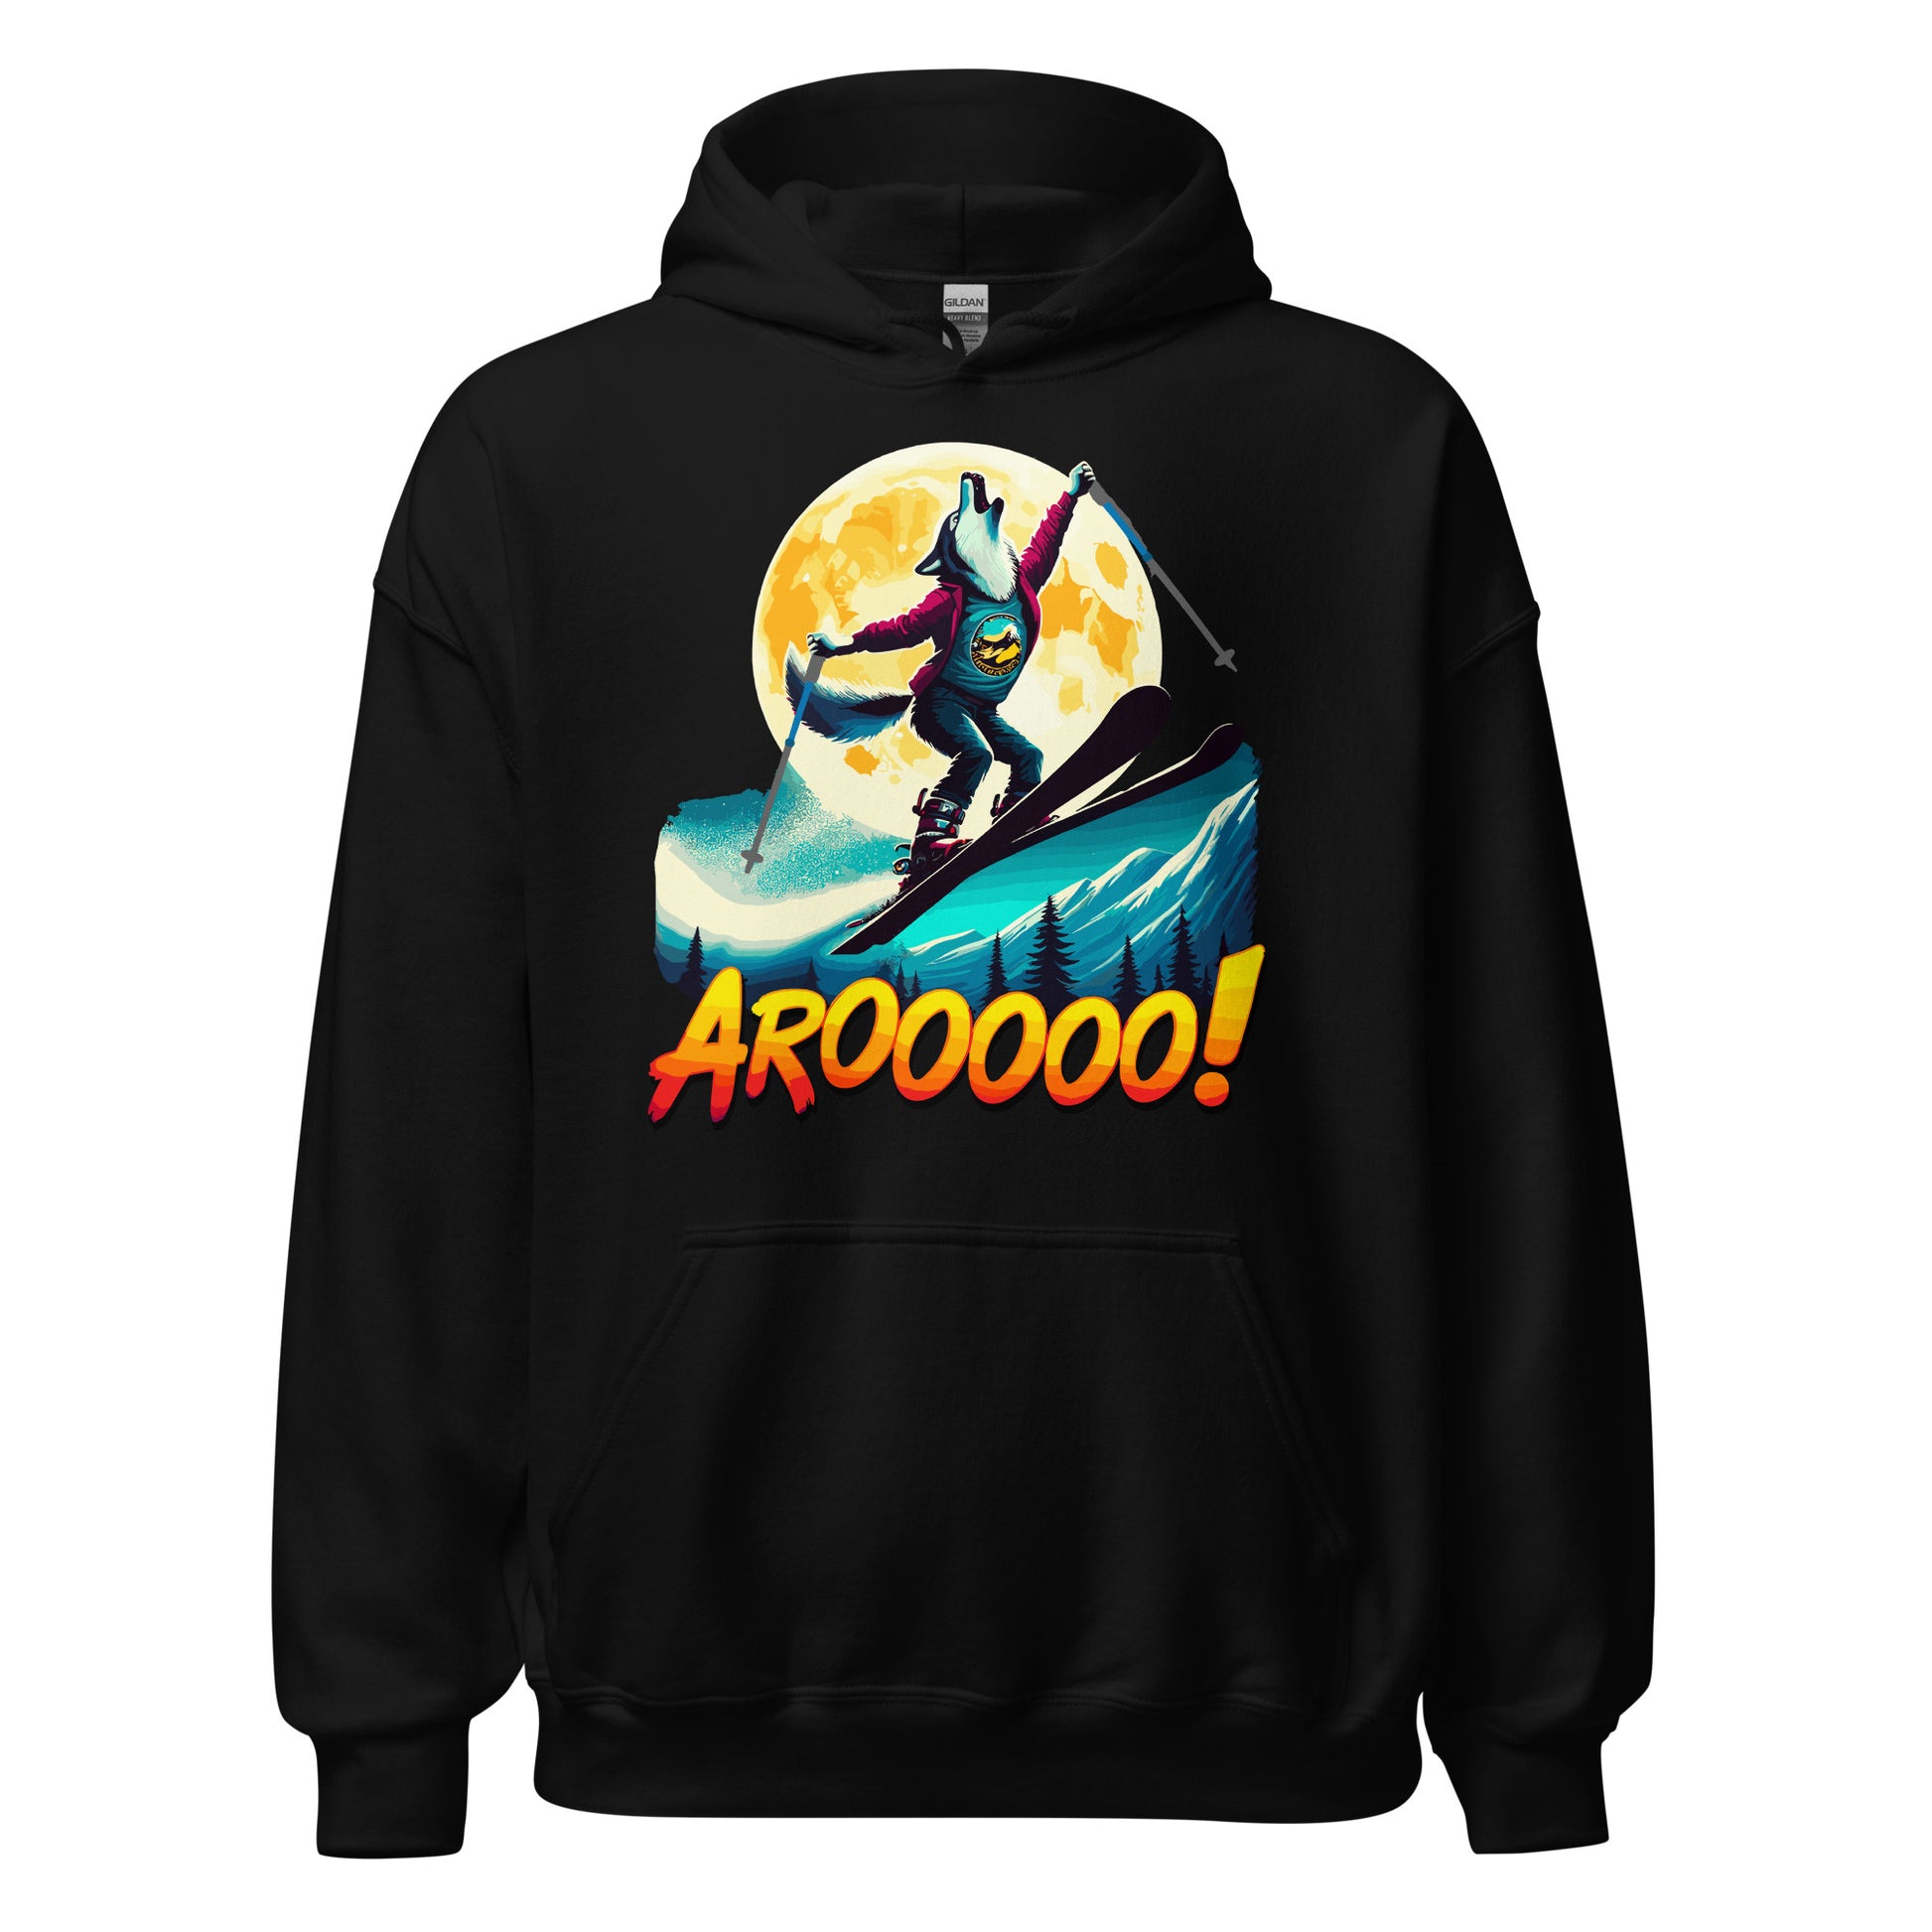 AROOOO! Wolf ski jumping in front of a full moon printed on a hoodie by Whistler Shirts